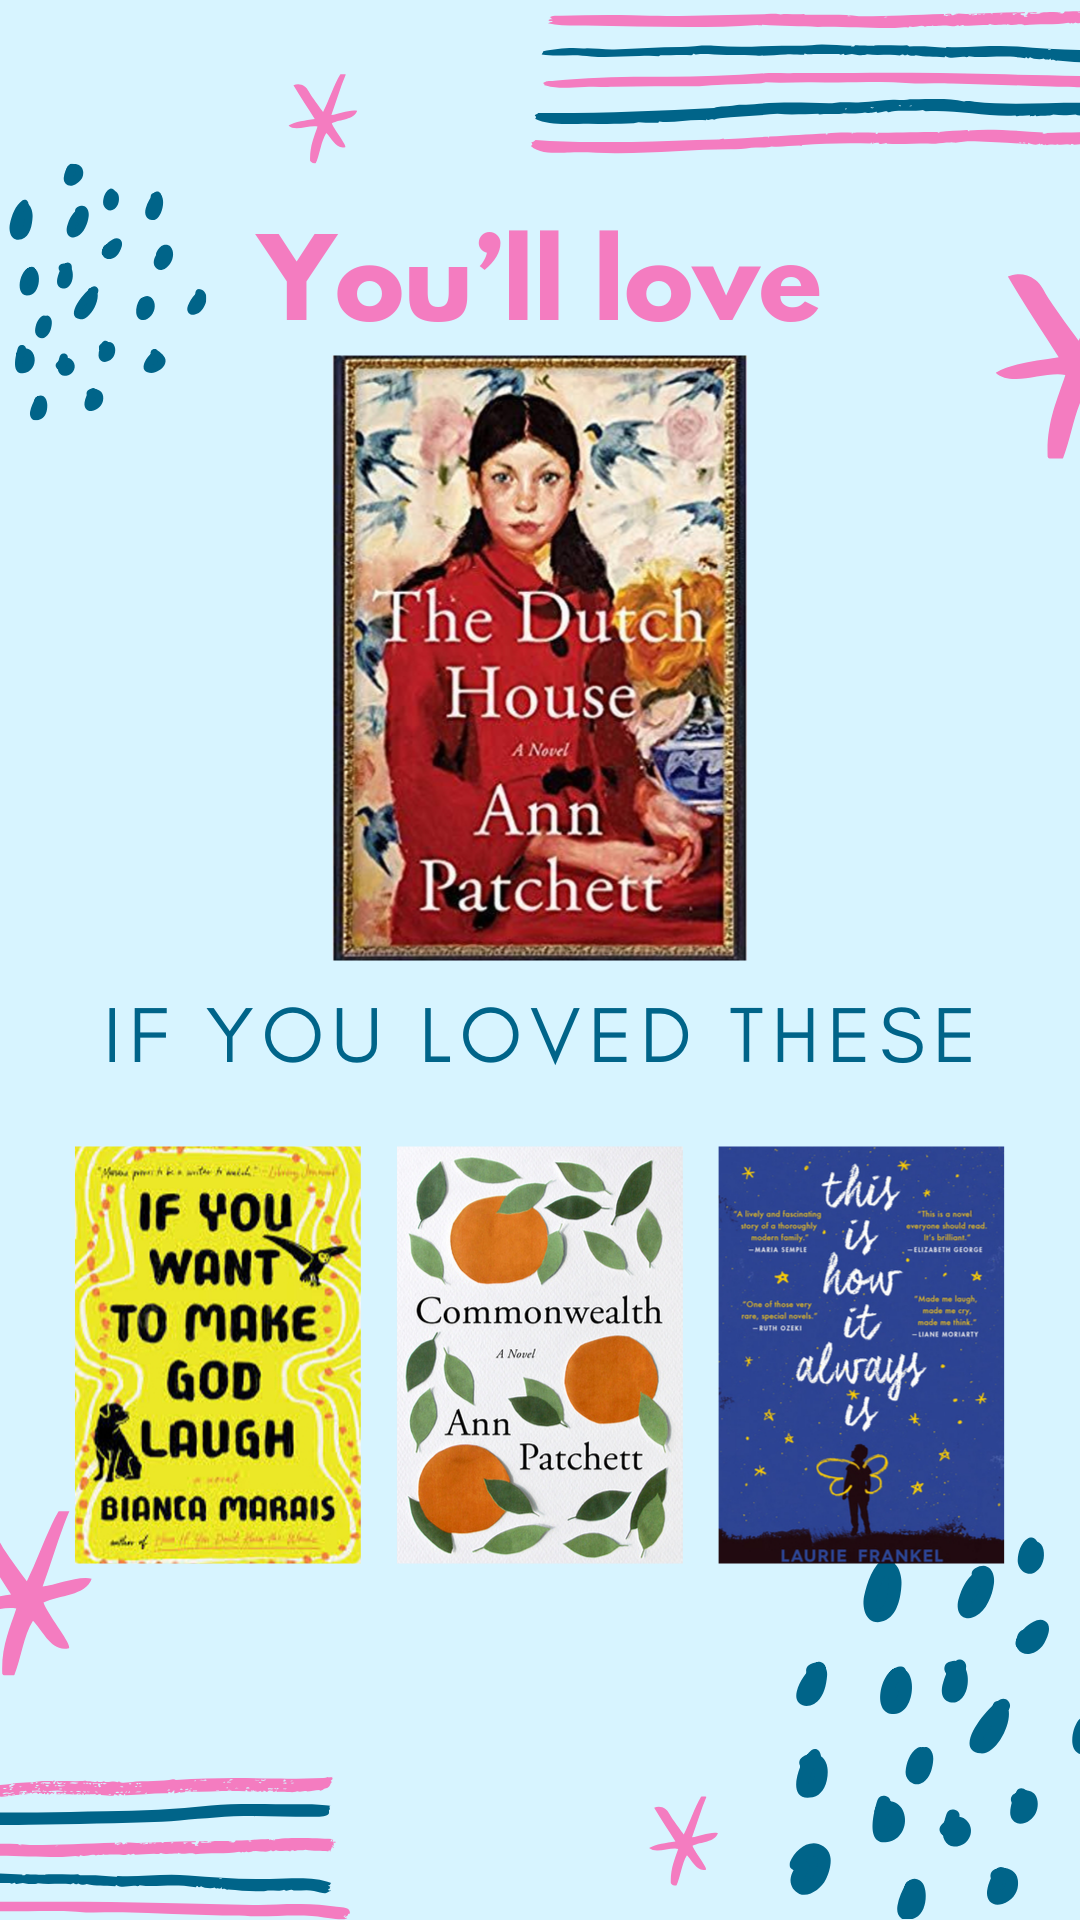 Looking for a great read? We've got 20 quick lit reviews to help you decide what to read next! We think you'll love The Dutch House by Ann Patchett if you loved any of these other stories.